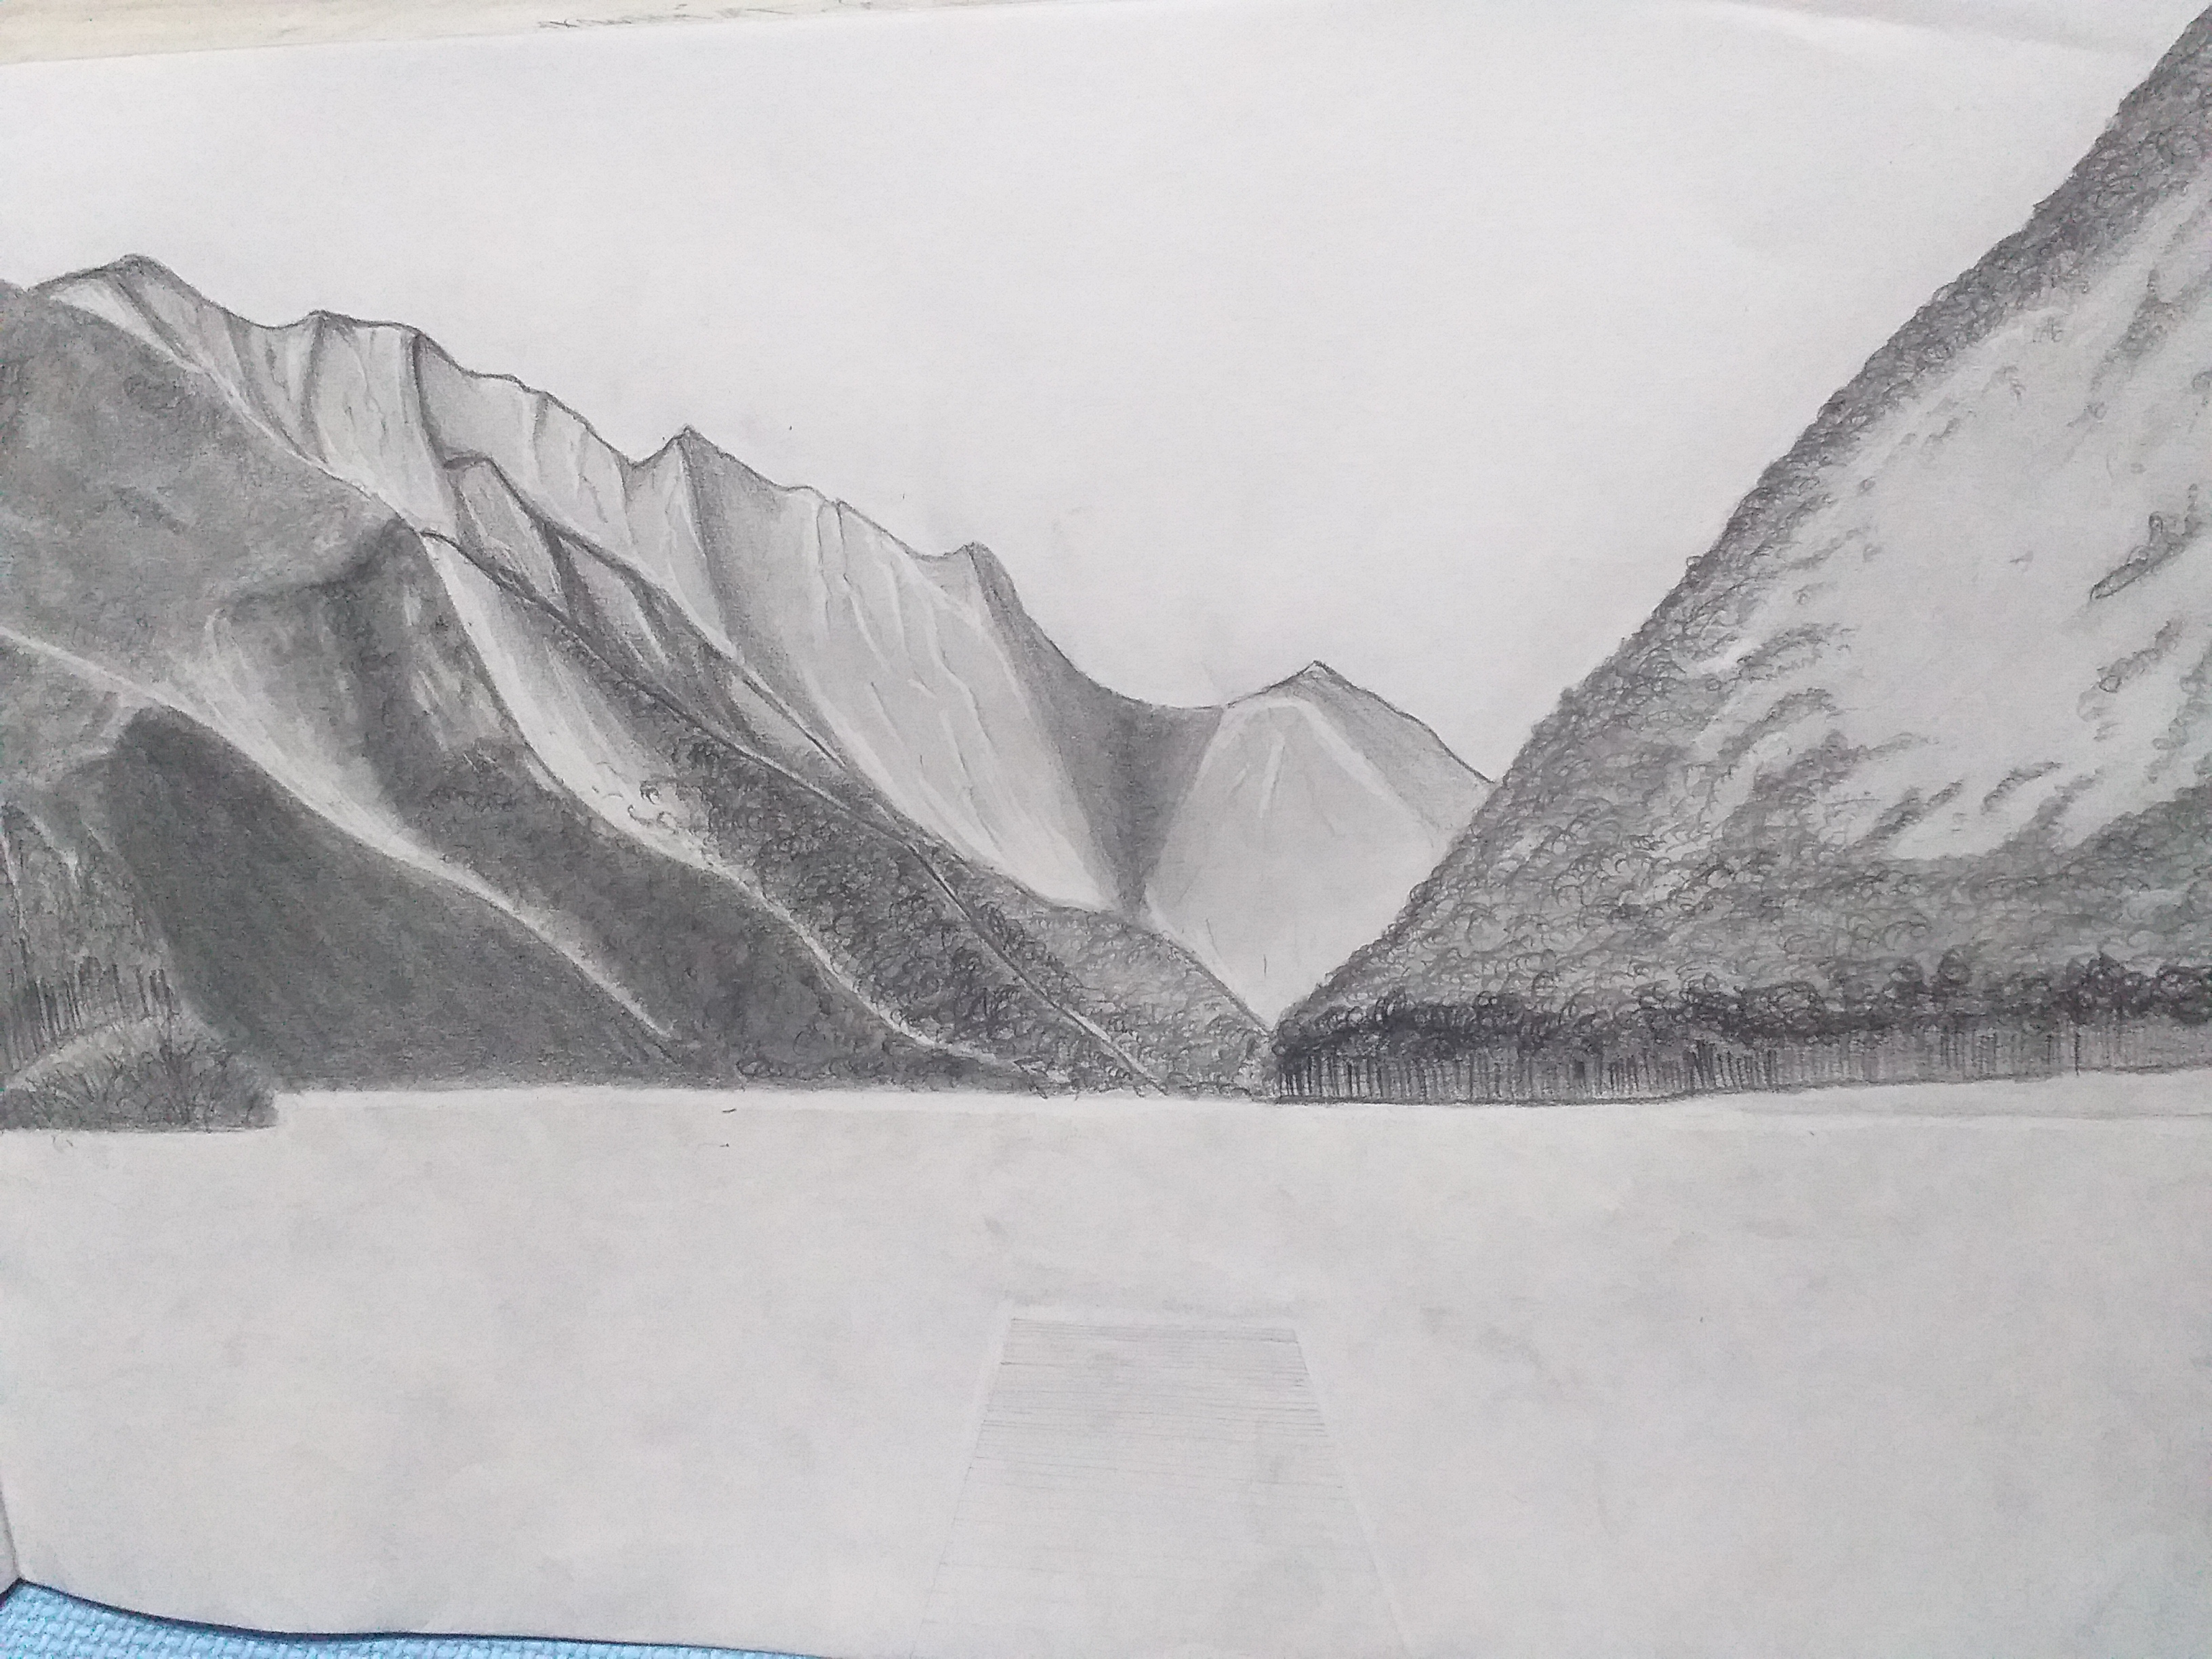 Lethal Chris's Misty Mountain | Mountain drawing, Landscape drawings,  Landscape pencil drawings